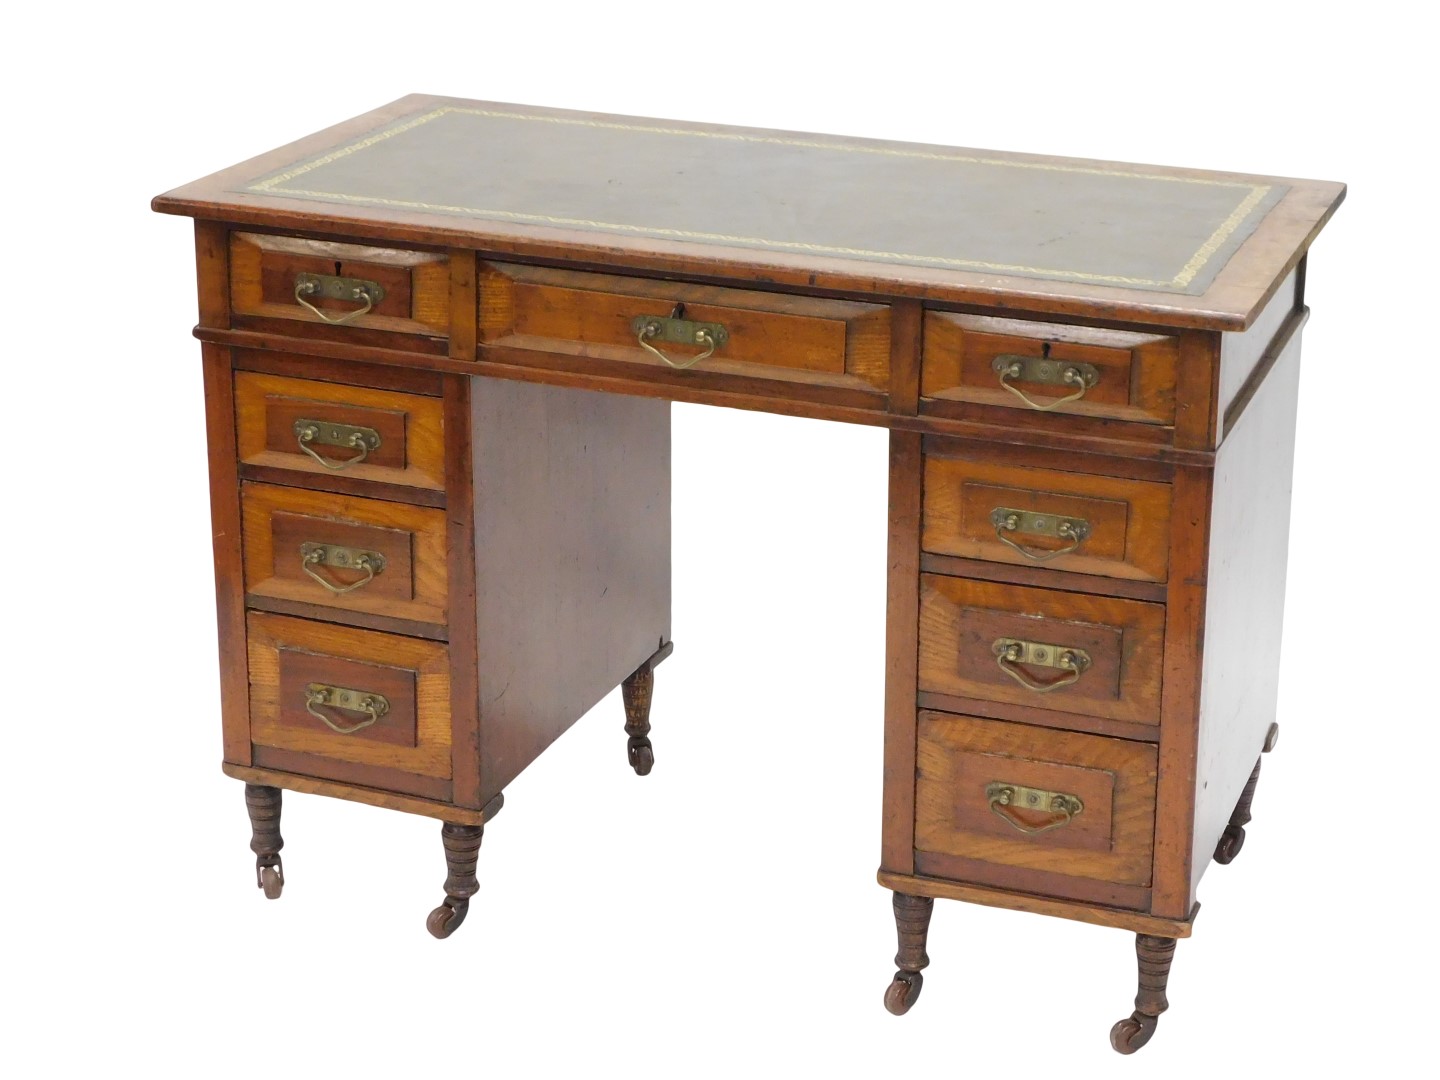 A Victorian ash and mahogany pedestal desk, the rectangular top inset with green leatherette, above